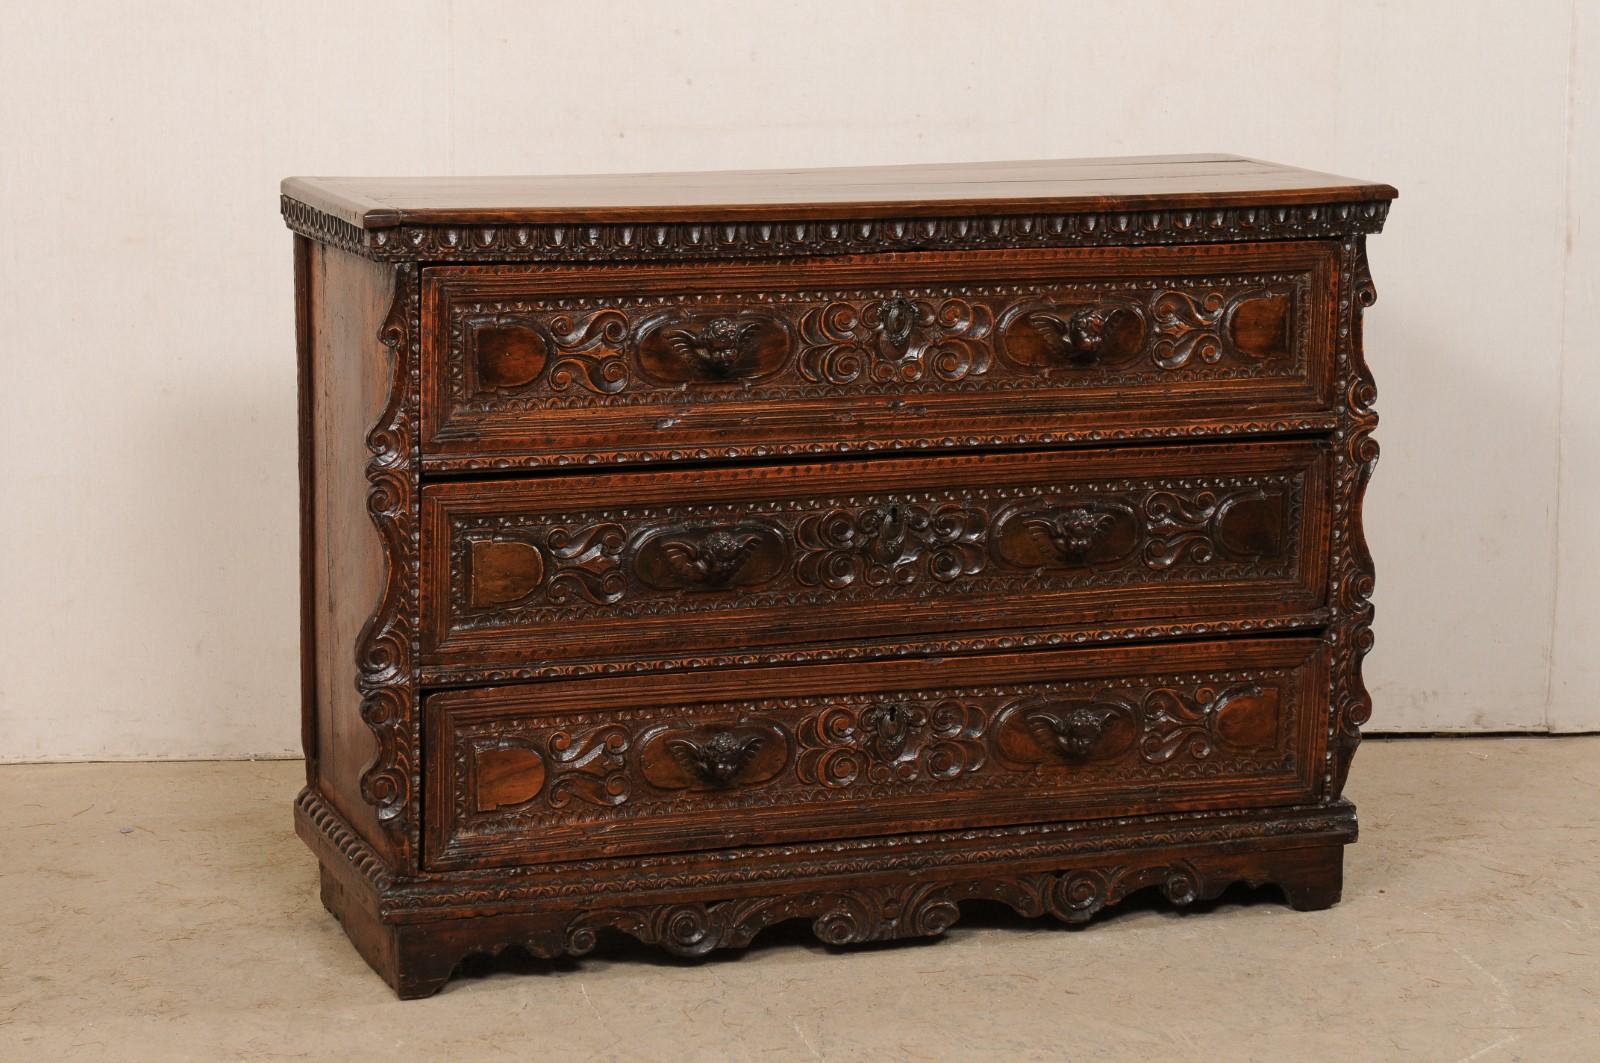 An Italian elaborately carved walnut commode from the early 18th century. This antique chest from Italy has been adorn with wonderful carvings throughout- from the egg-n-dart trim moldings to the 